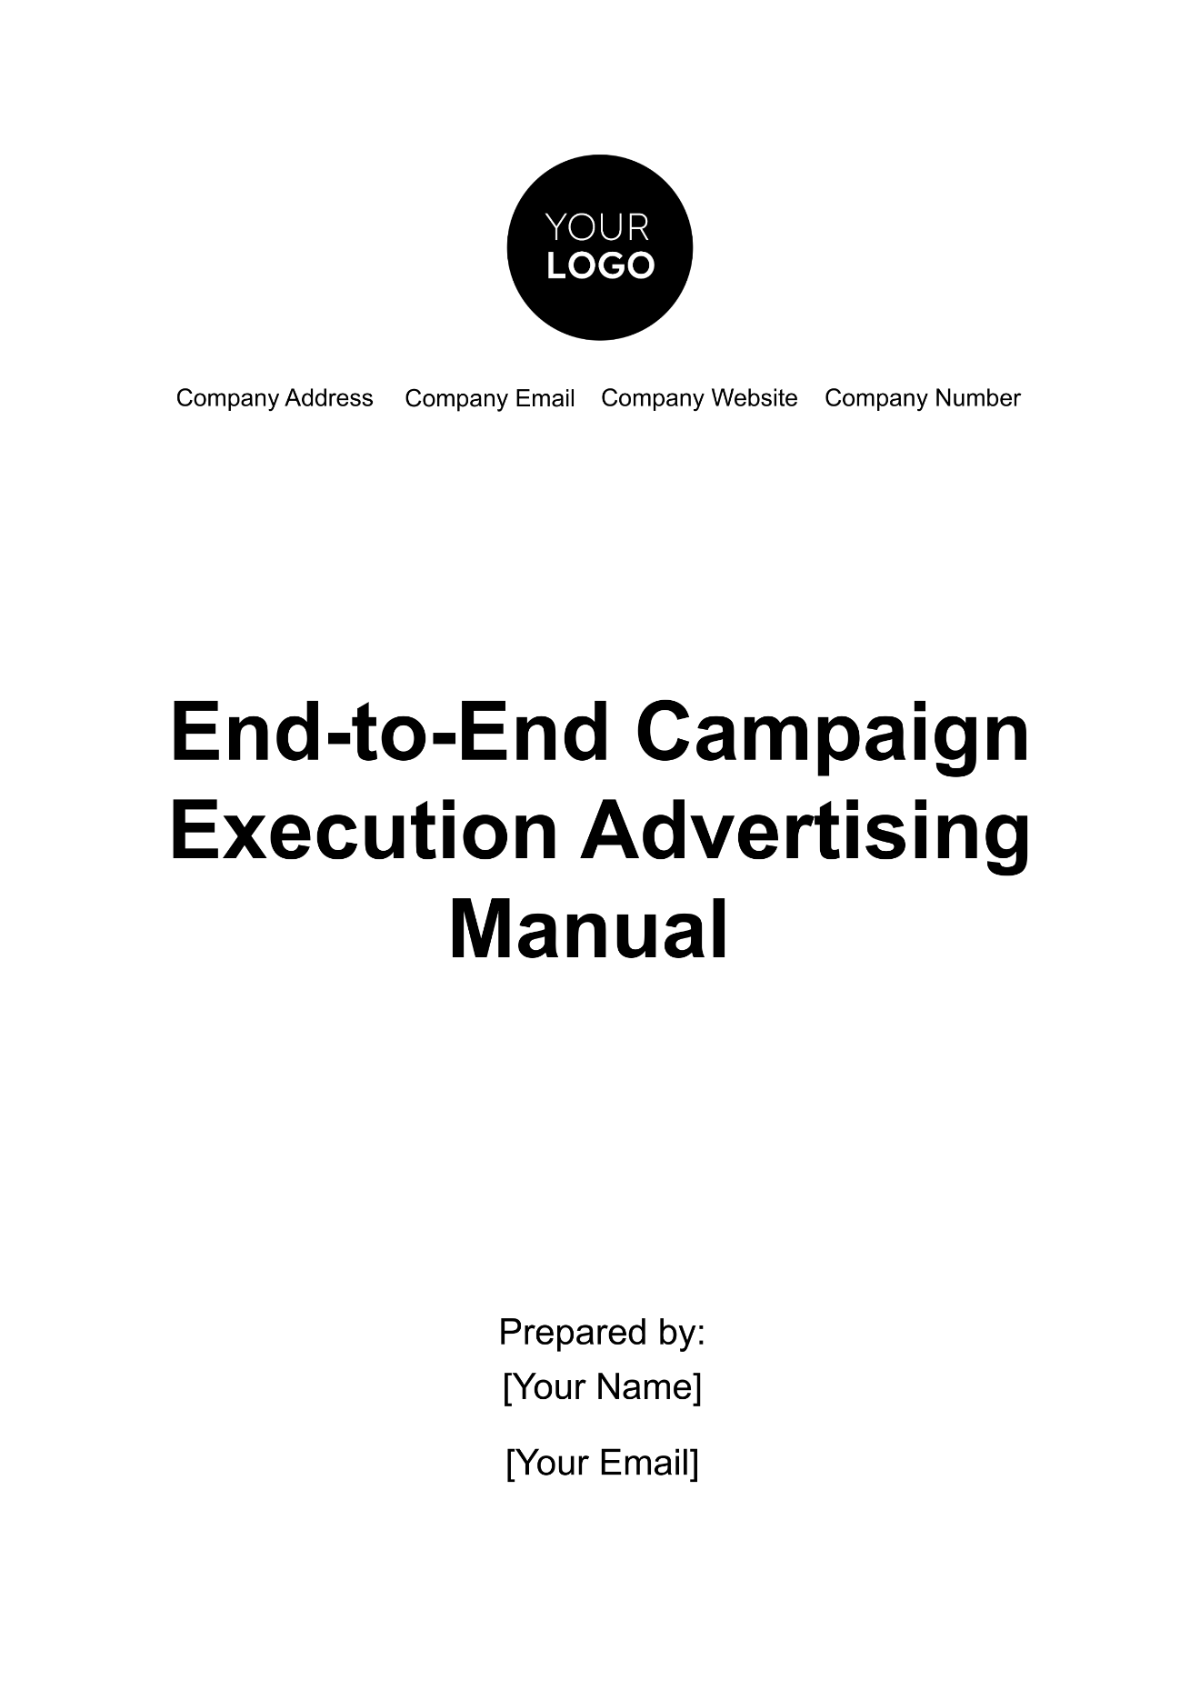 End-to-End Campaign Execution Advertising Manual Template